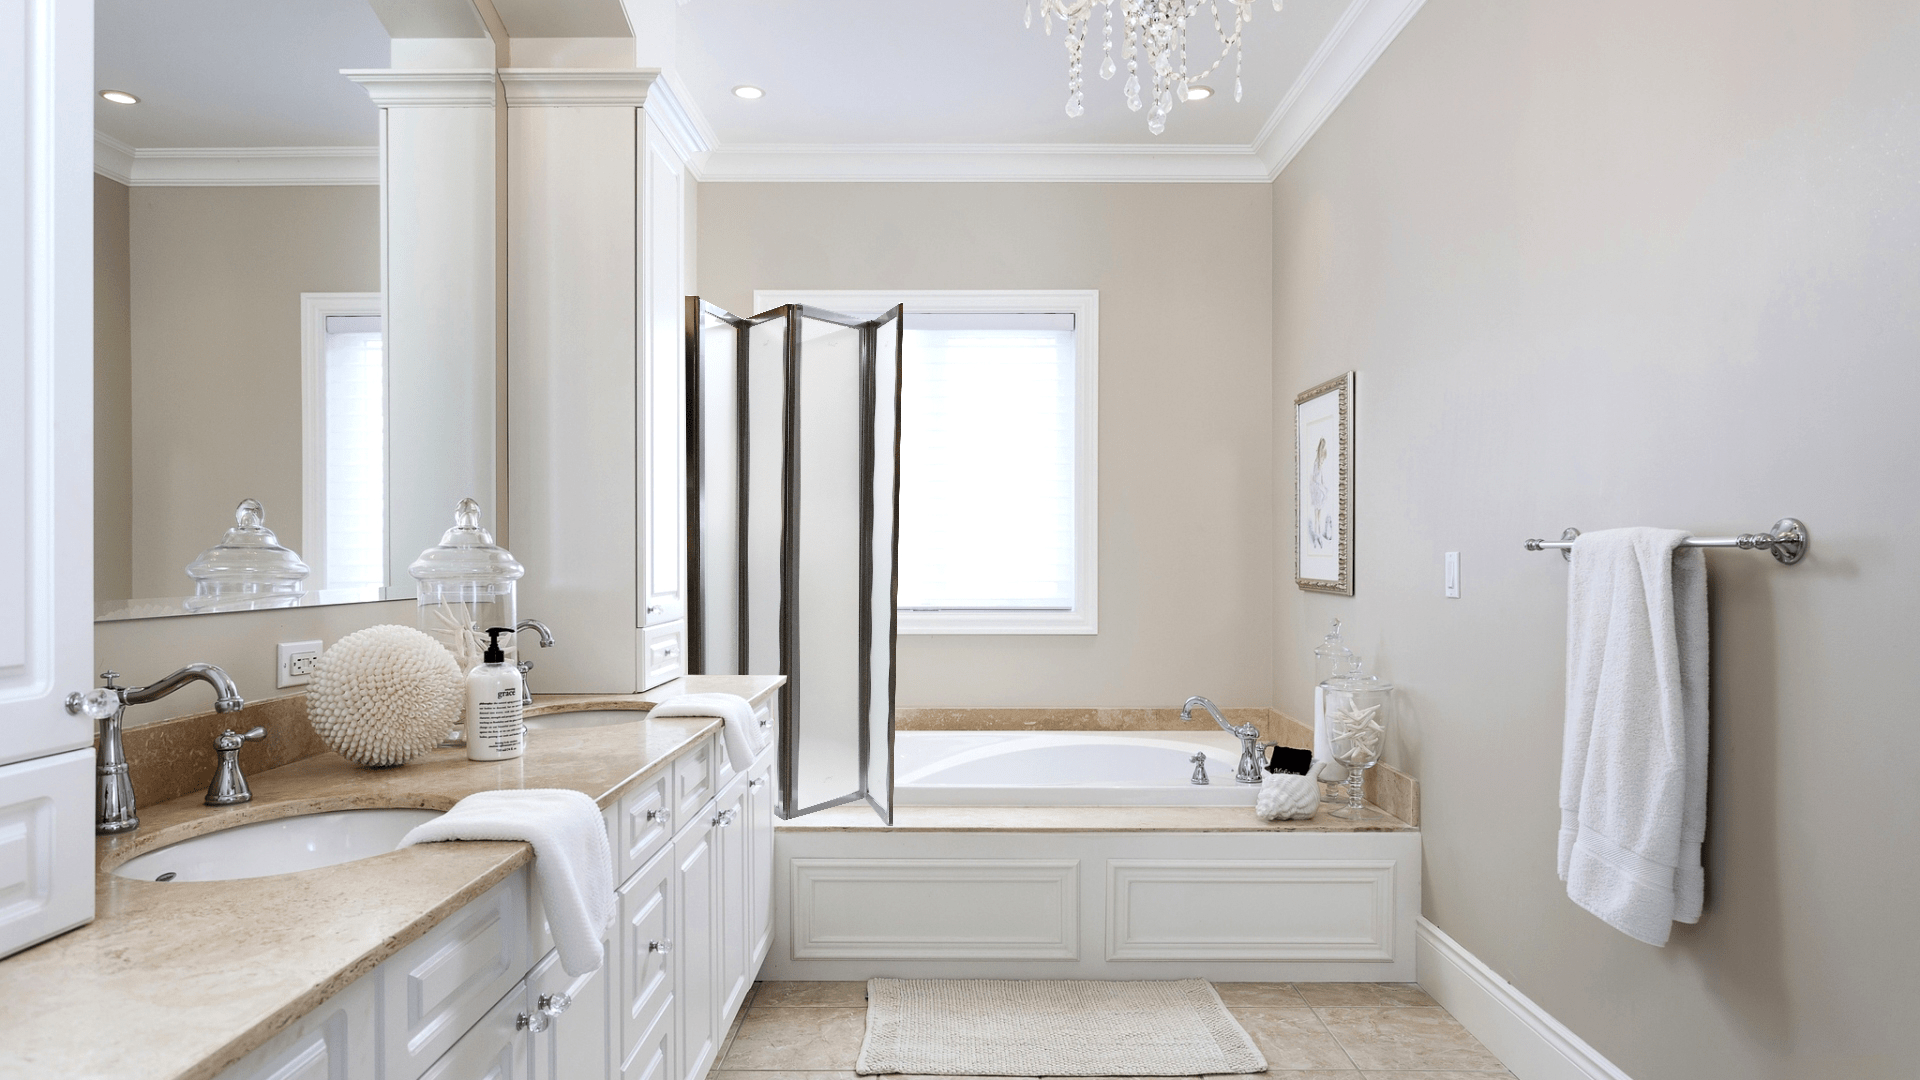 The Benefits of a Well-Planned Bathroom Remodel near meHighland Park